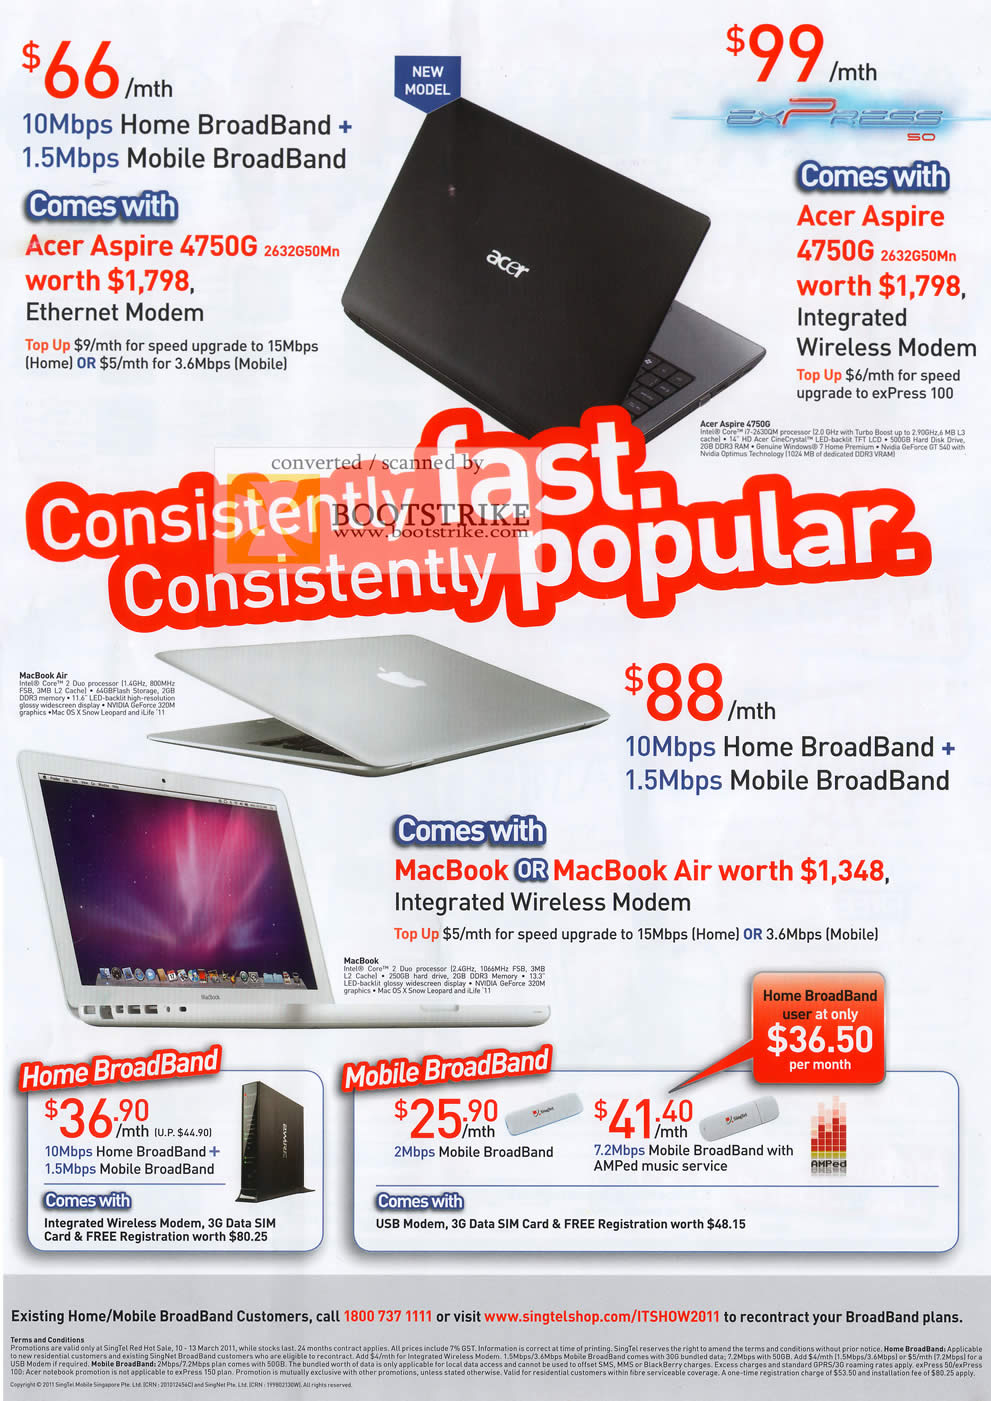 Broadband Mobile MacBook Air 10Mbps IT SHOW 2011 Price List ...